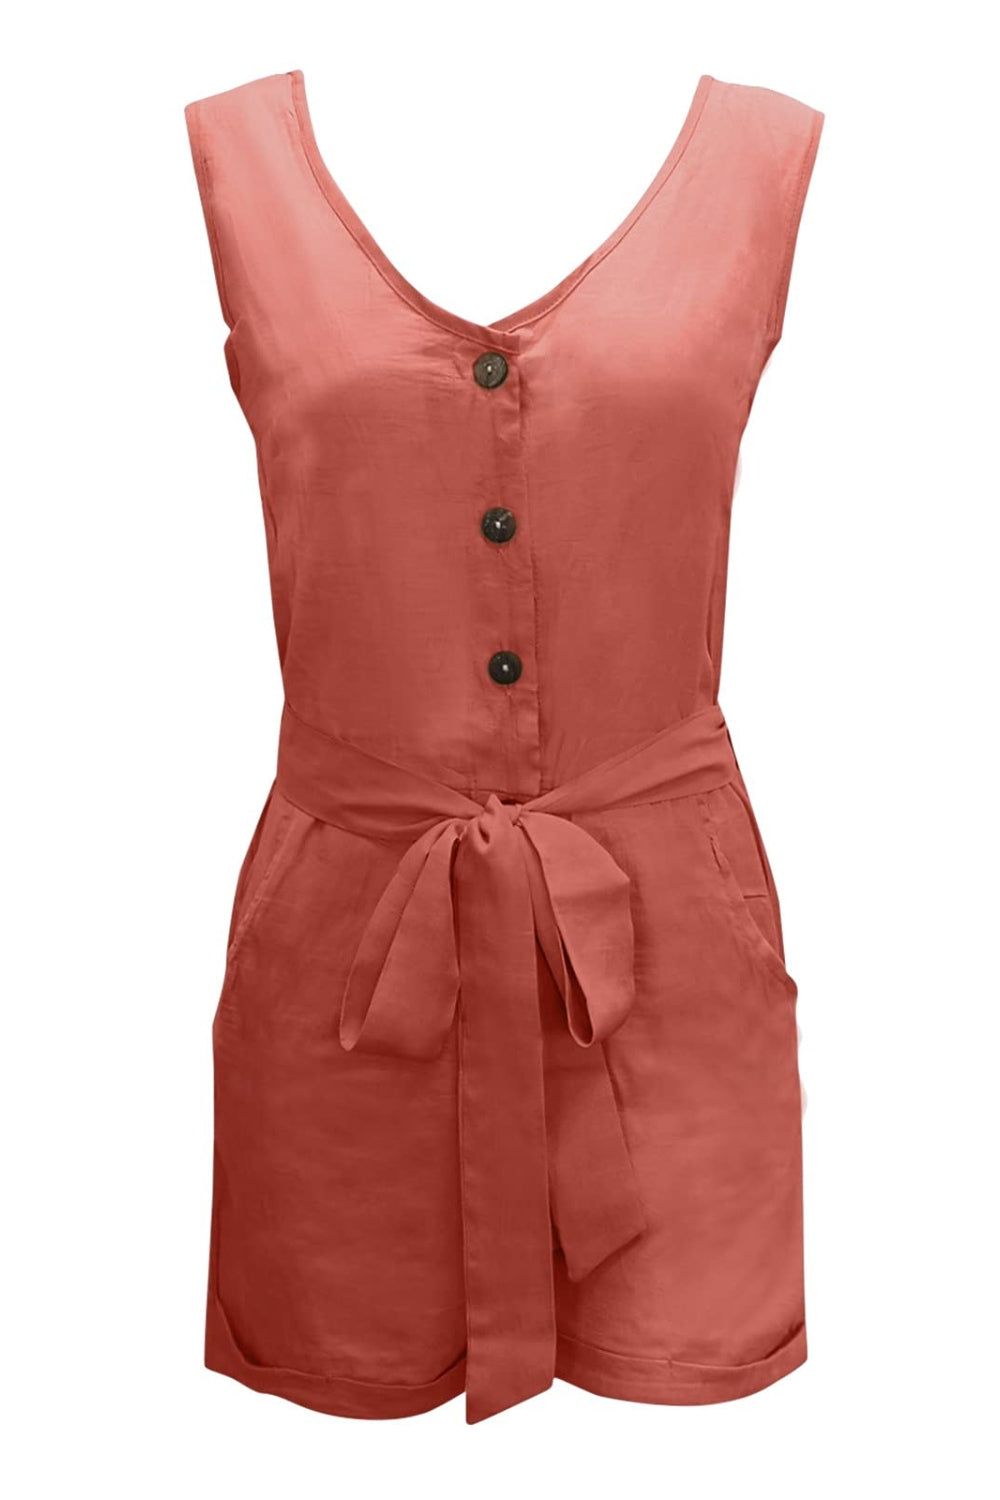 PREORDER- Full Size Tied V-Neck Sleeveless Romper with Pockets